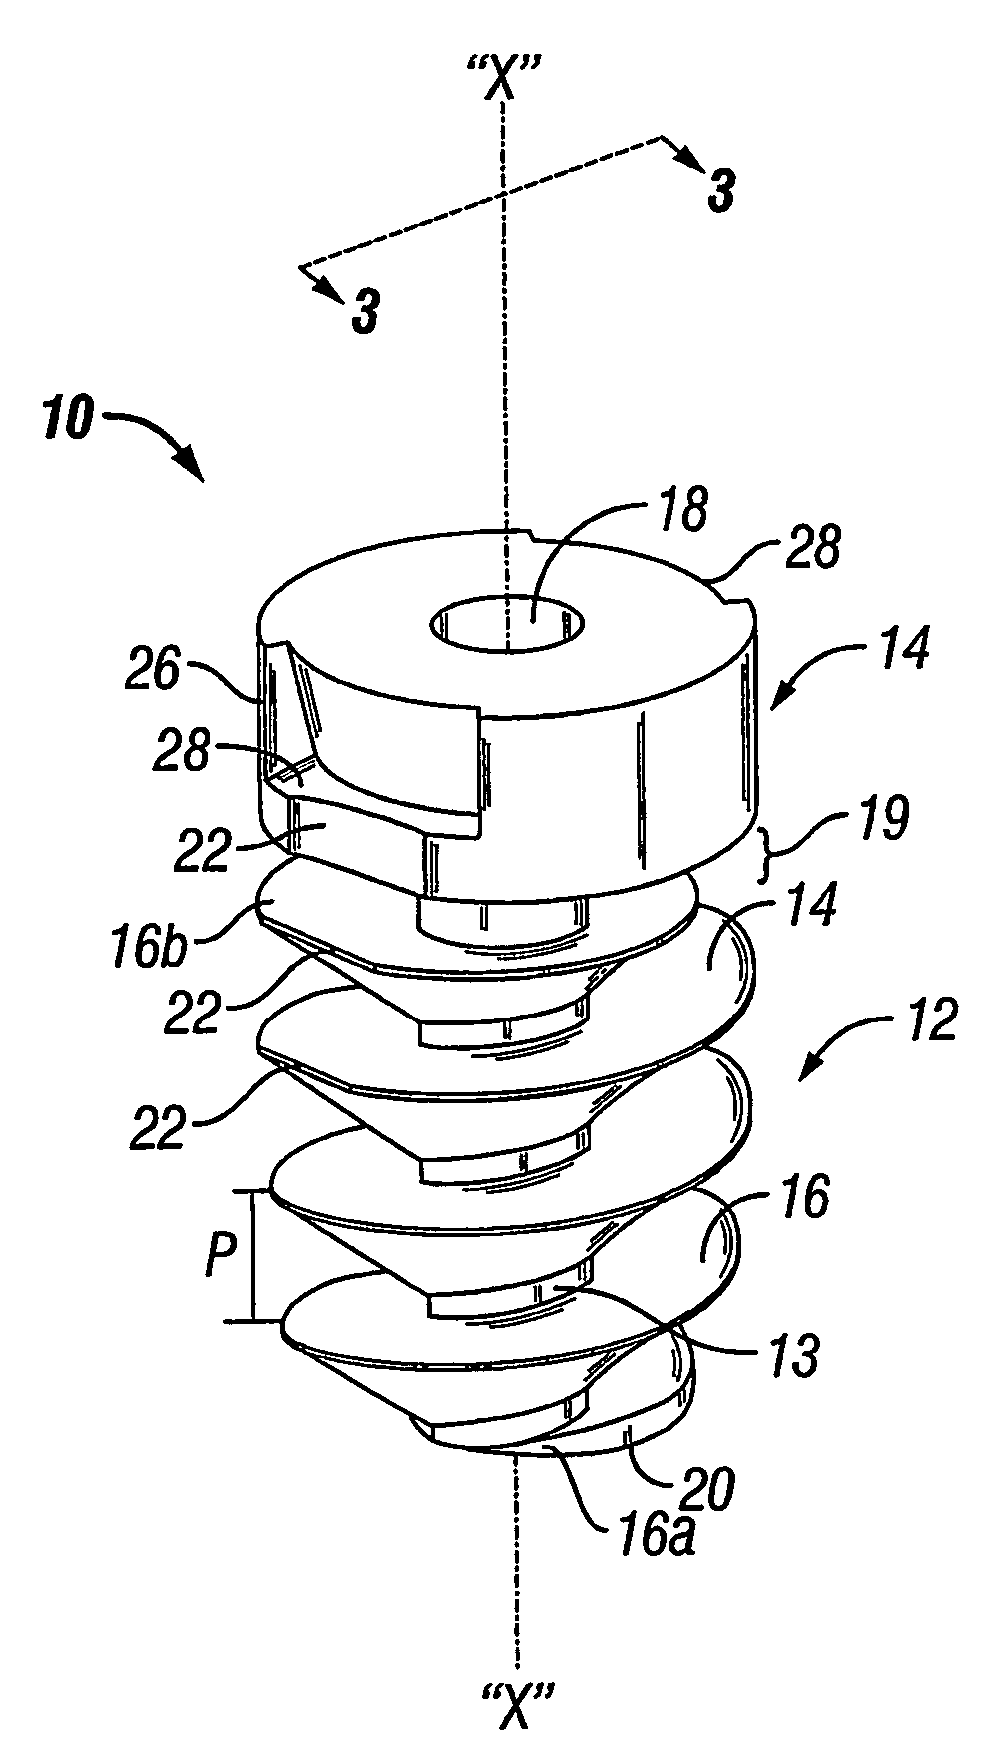 Multiple member interconnect for surgical instrument and absorbable screw fastener